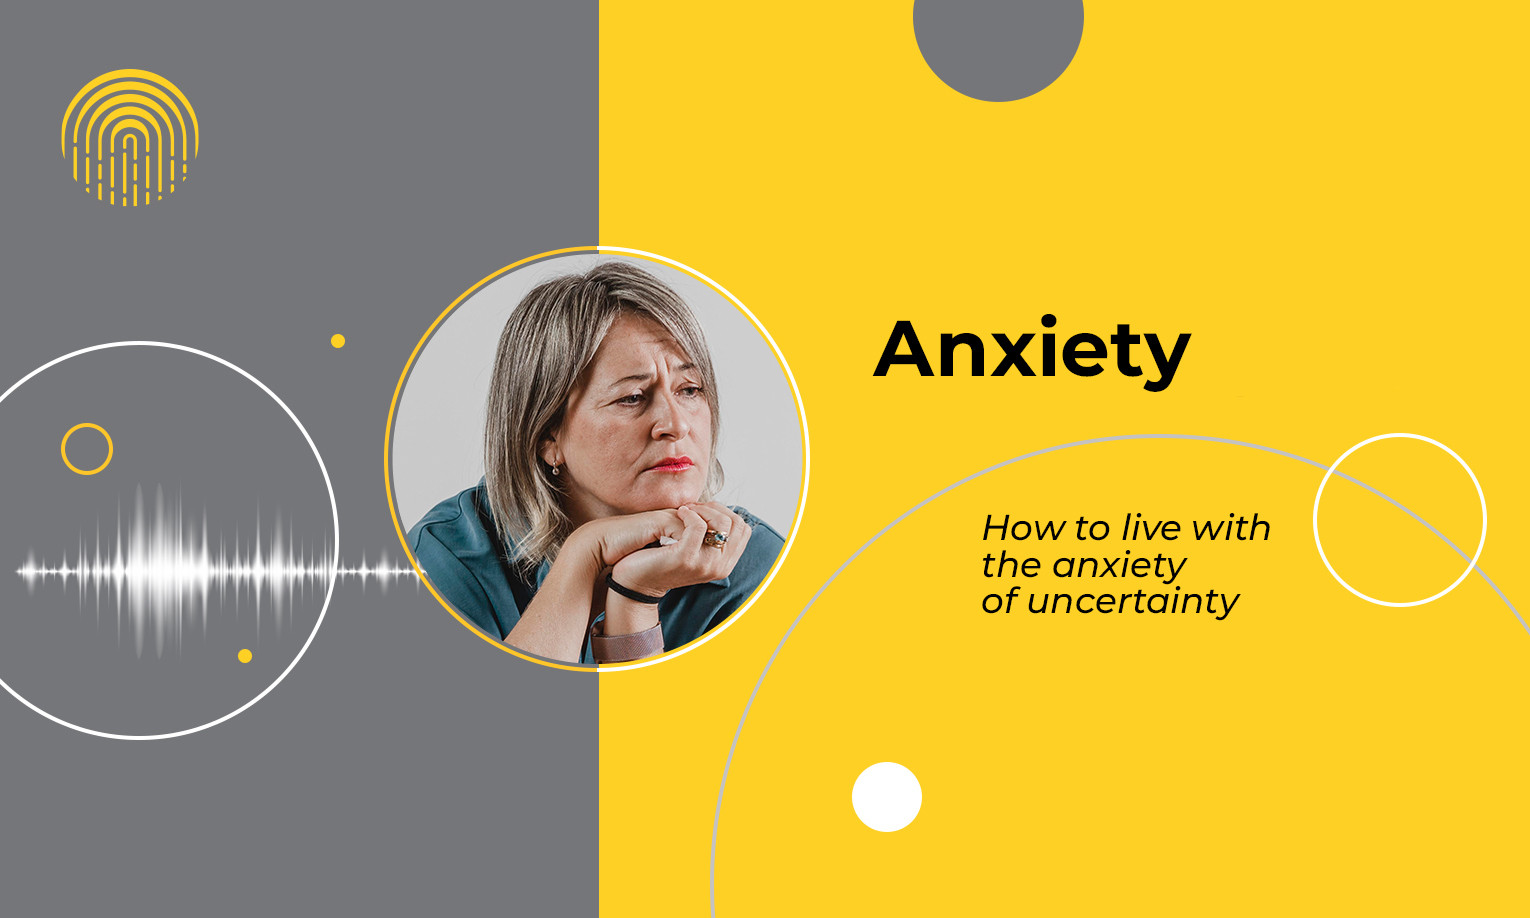 Anxiety as a new reality